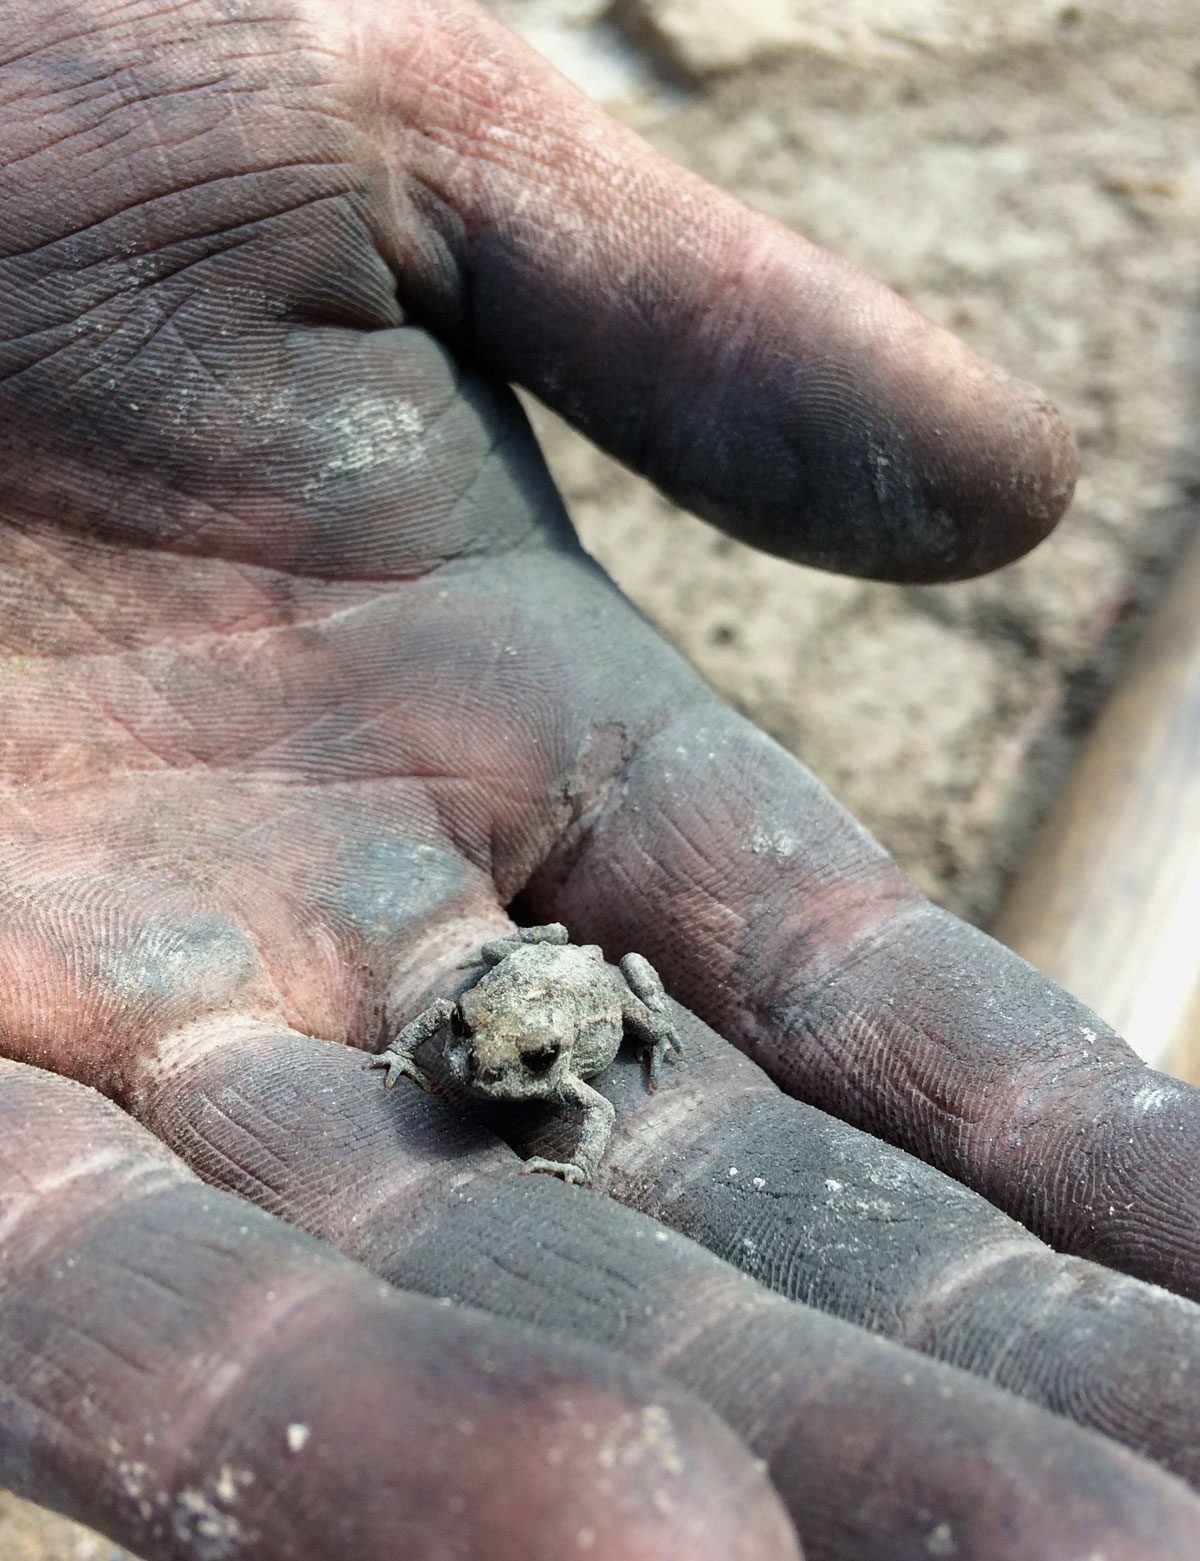 Frog covered in ash in hands of firefighters